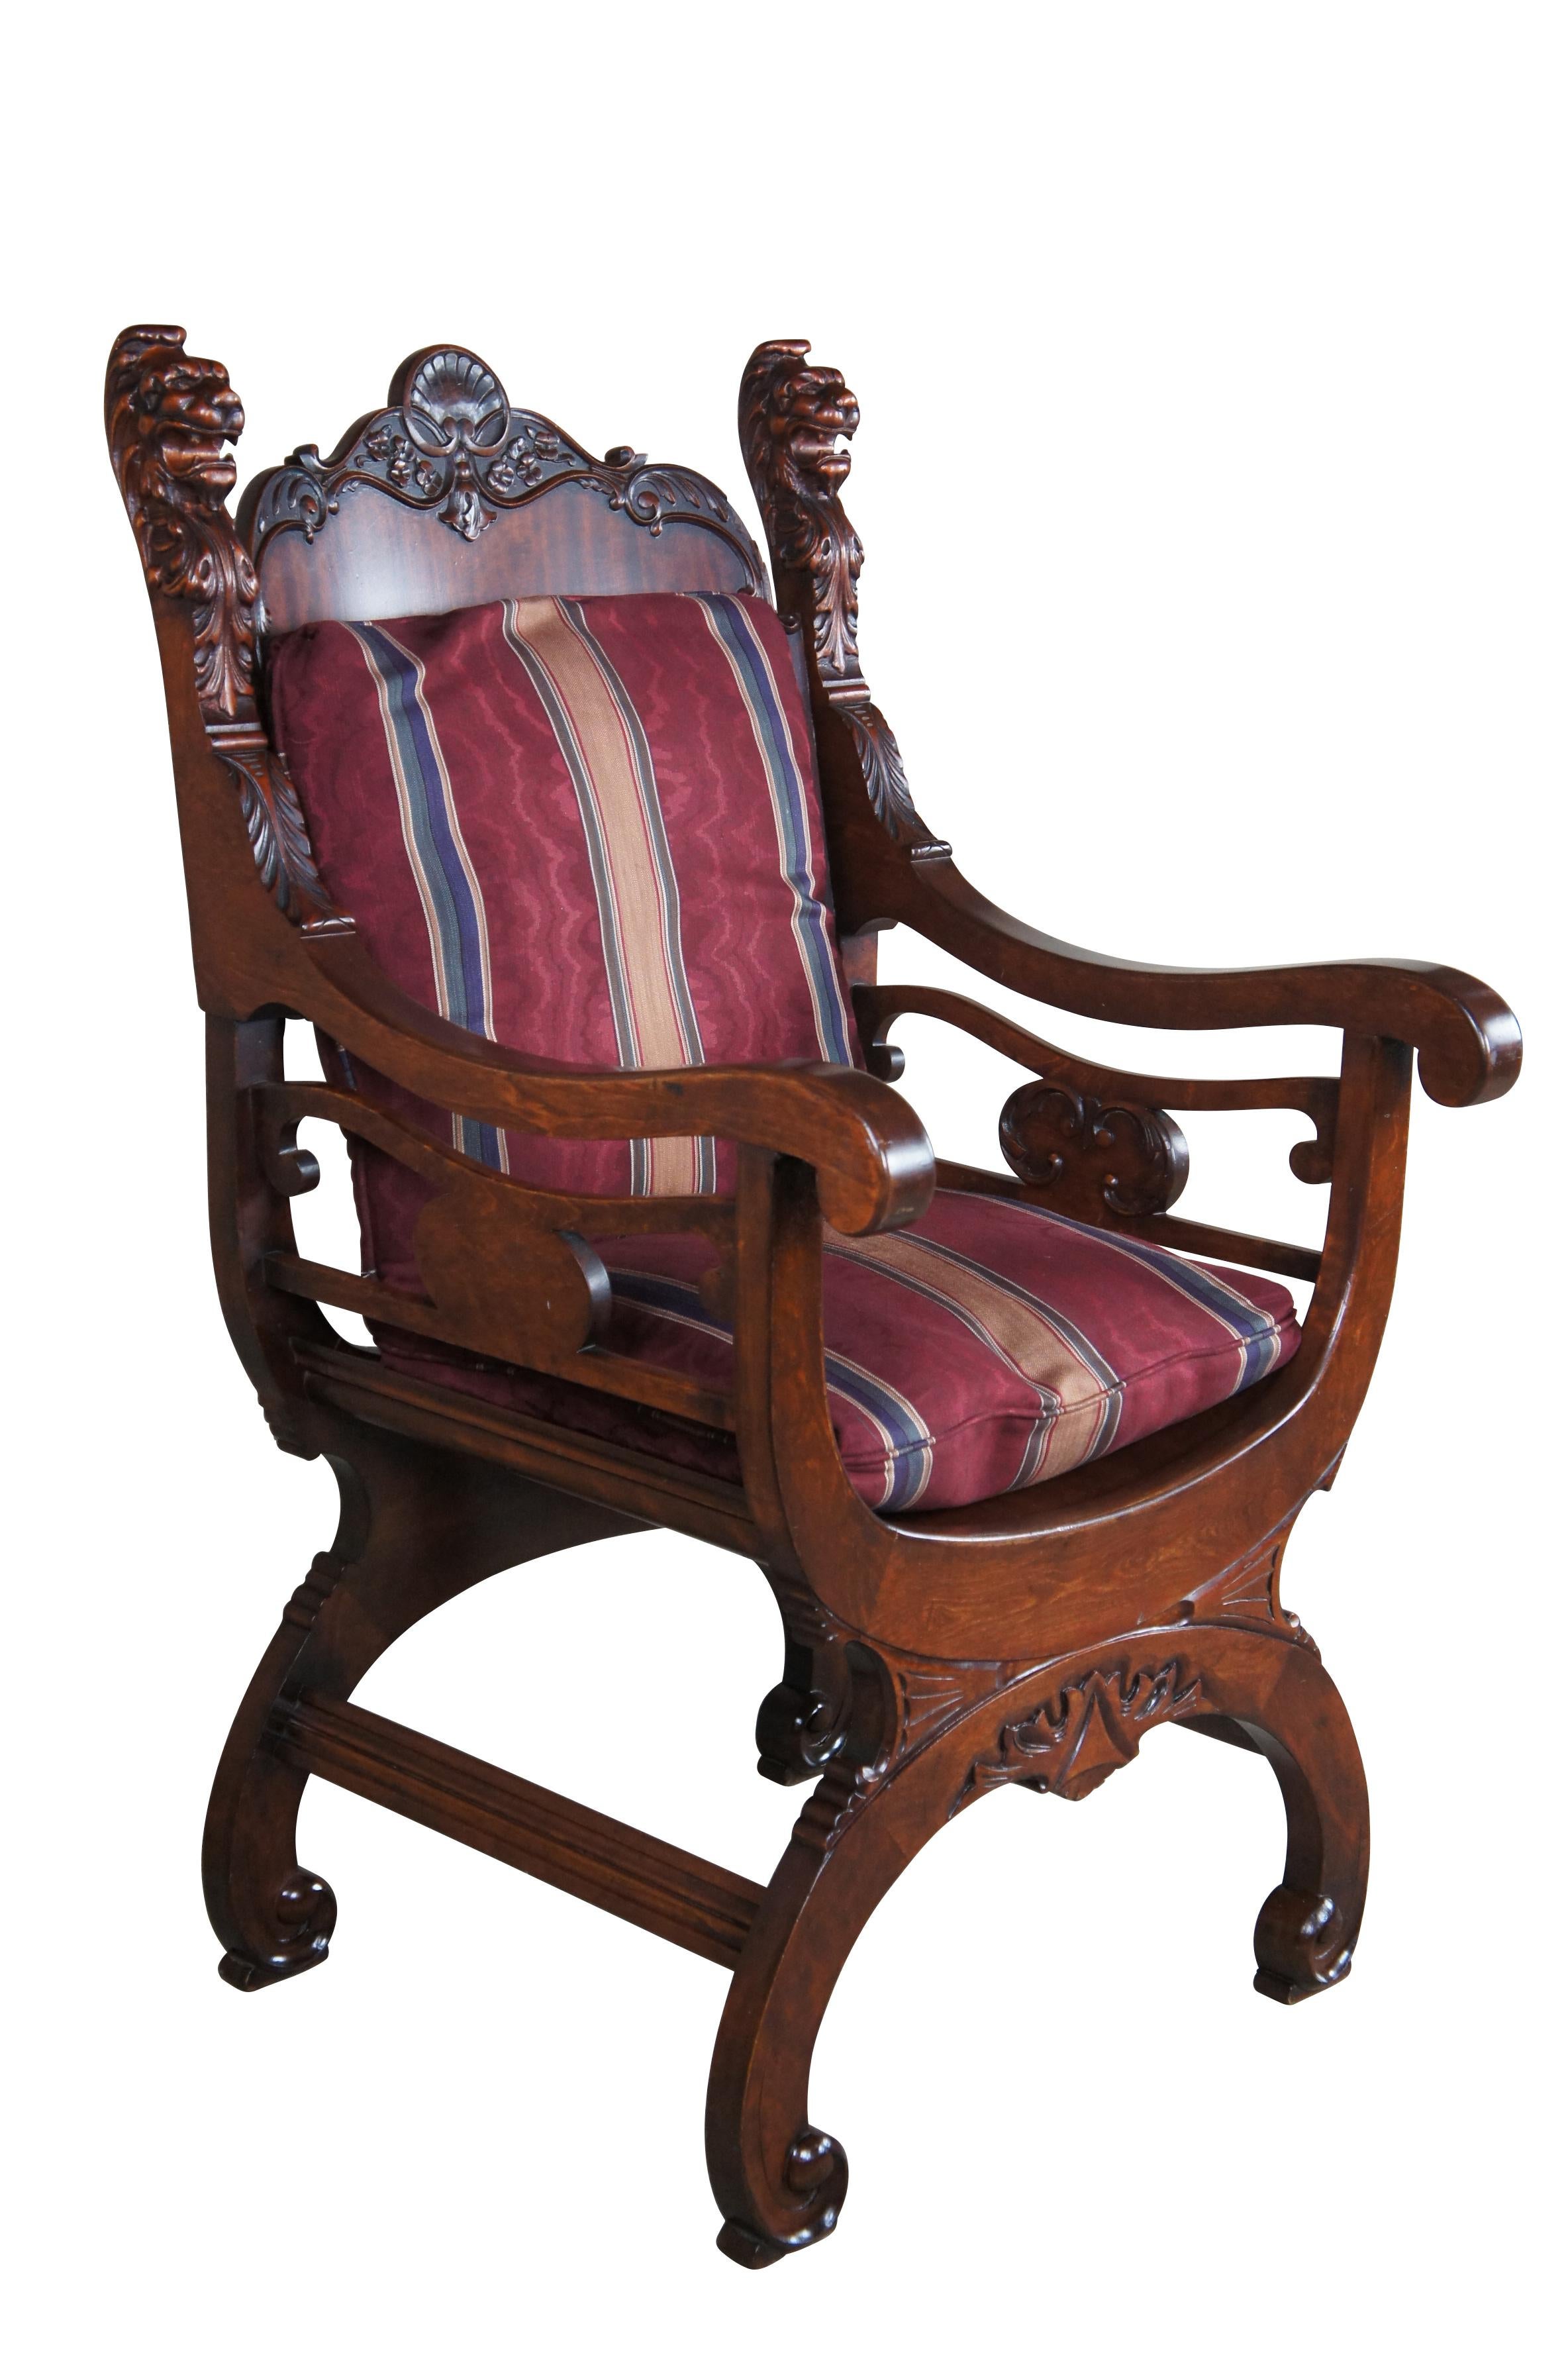 old wooden chair with lion head arms